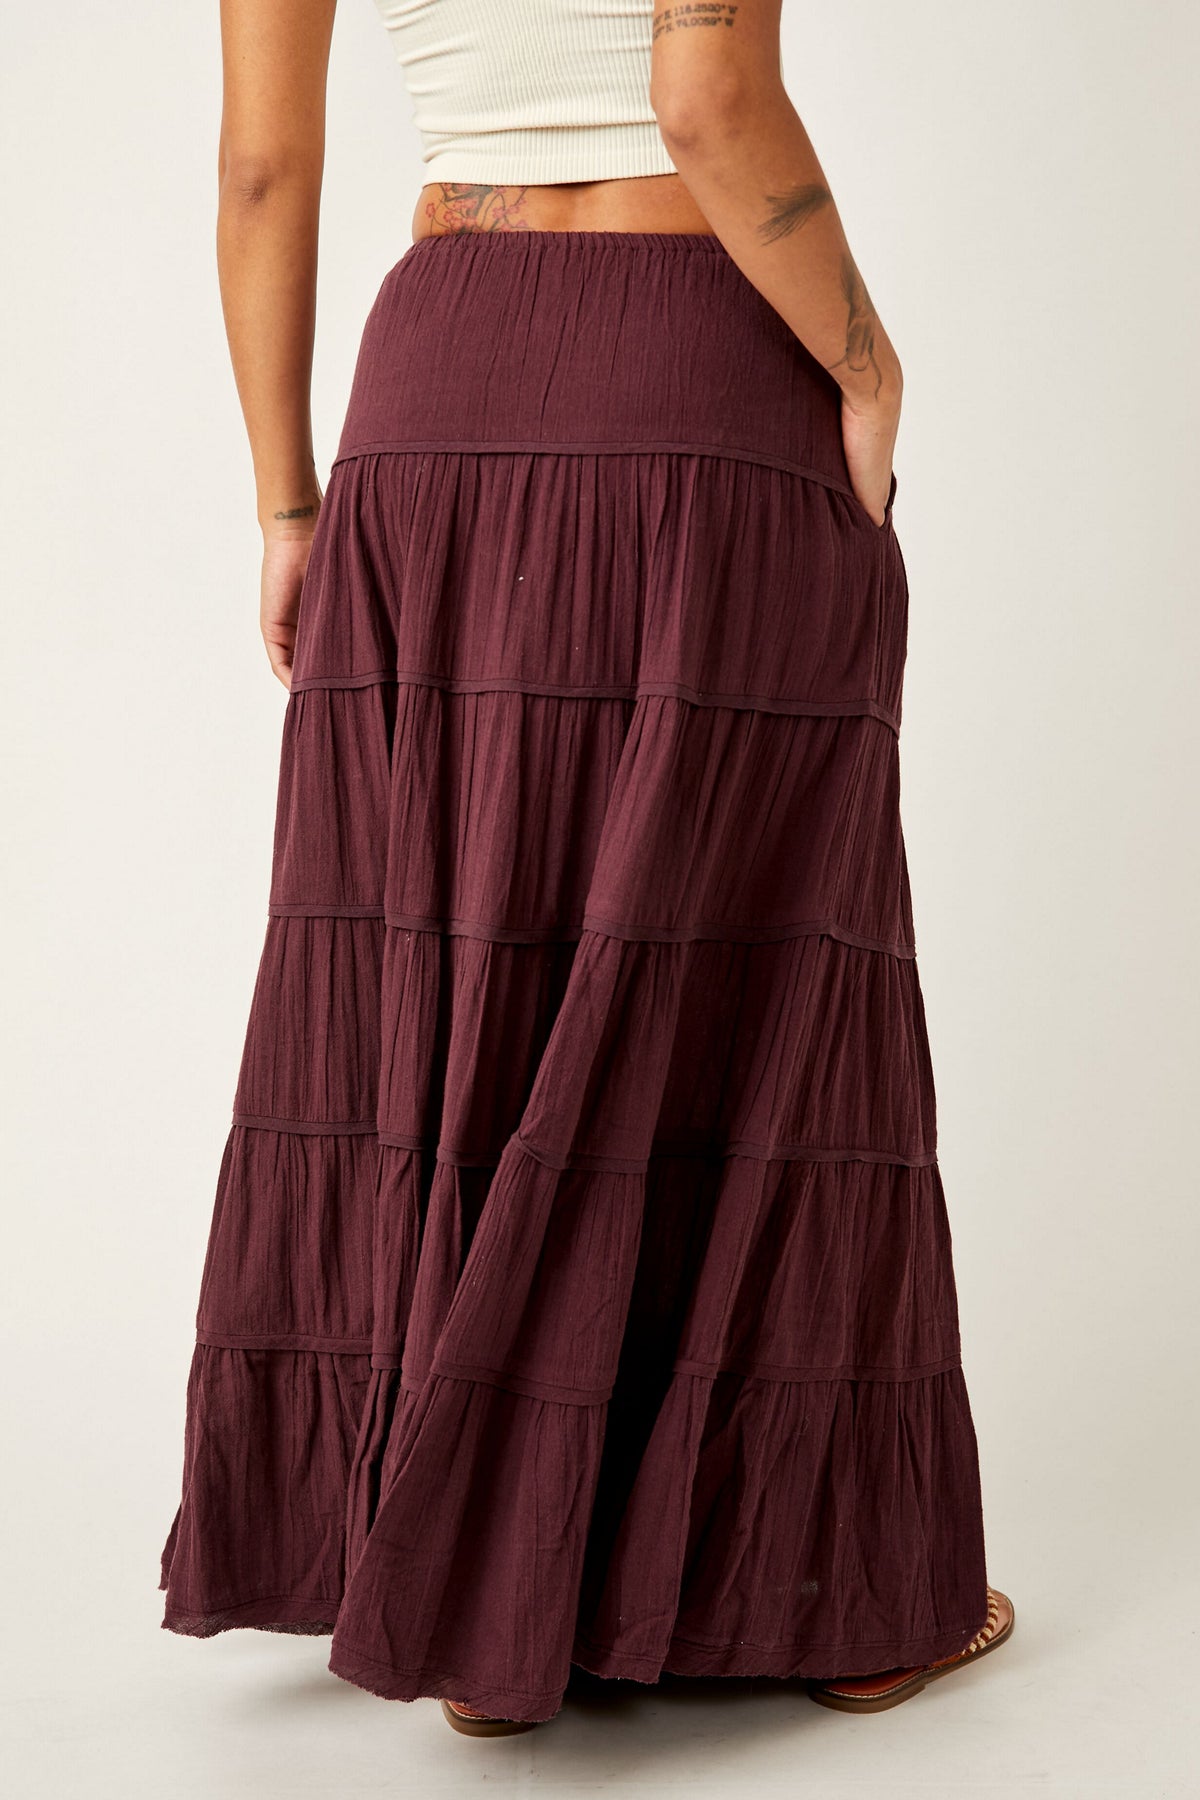 Free People Simply Smitten Maxi Skirt